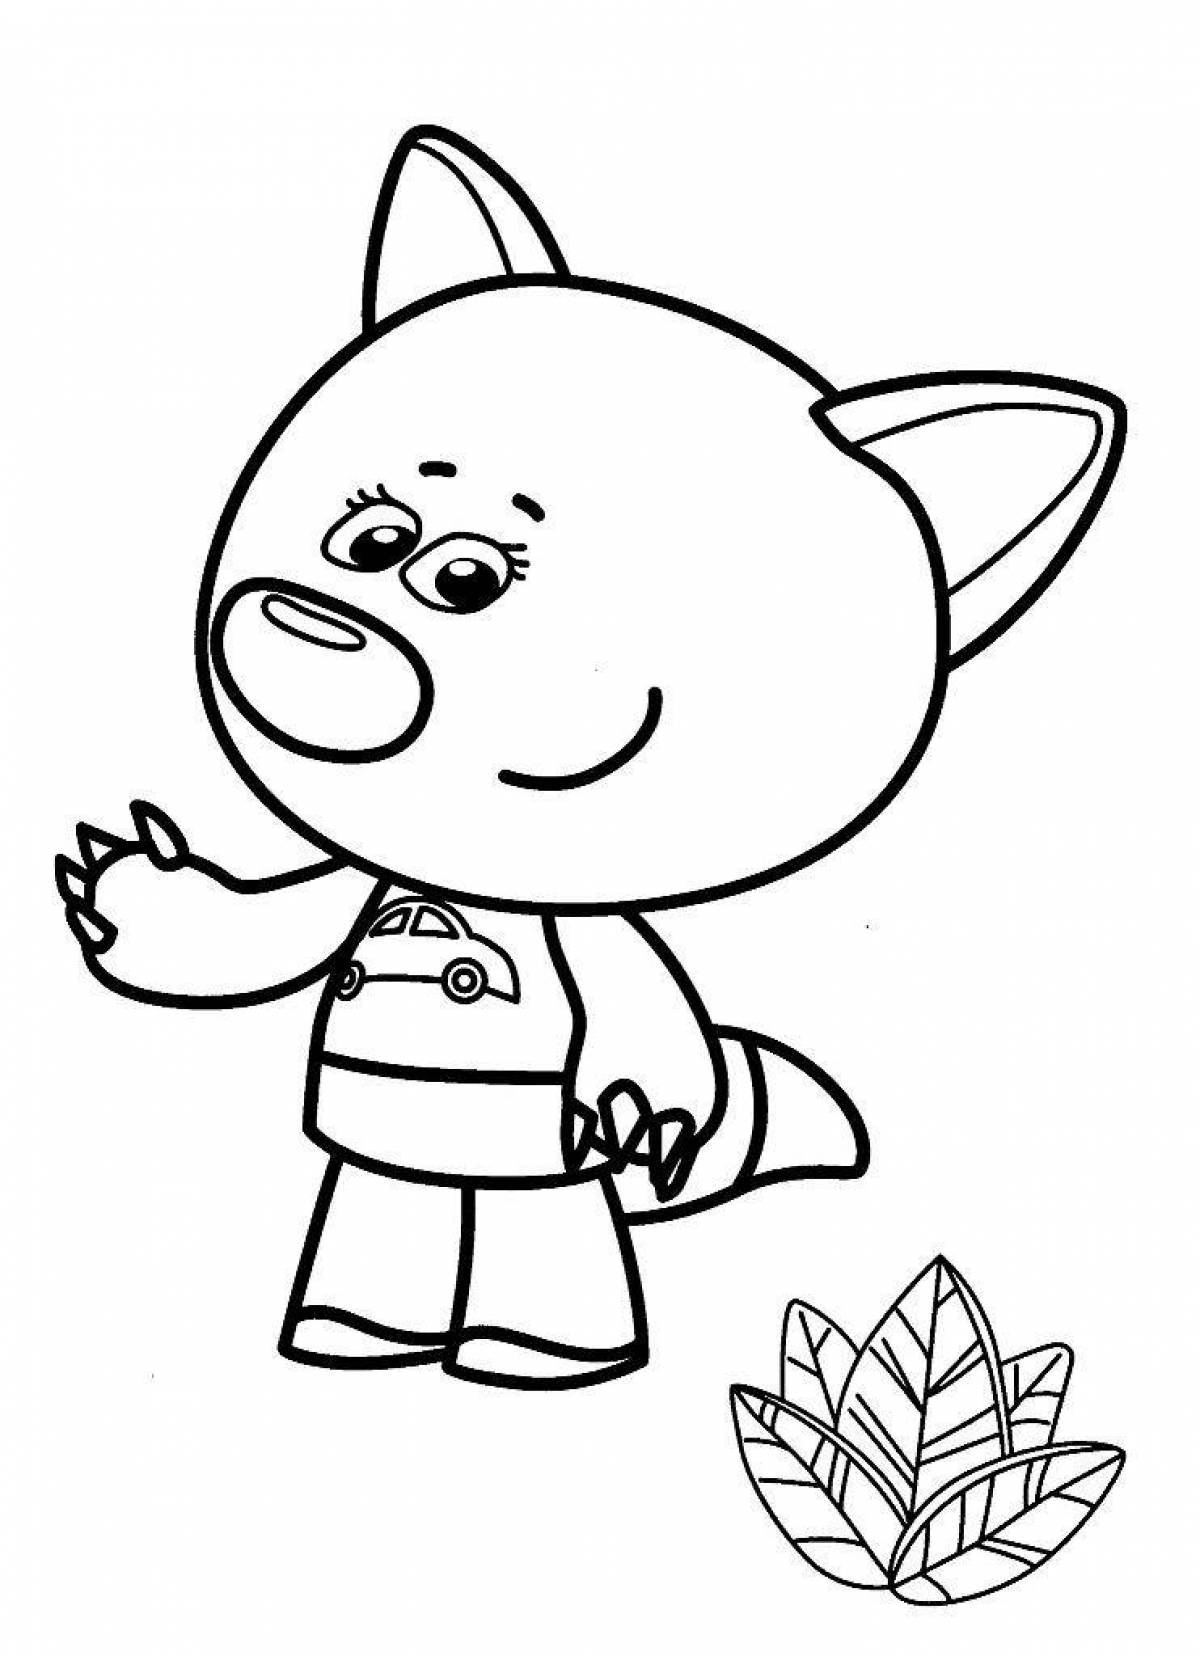 Soft coloring pages with bears for kids